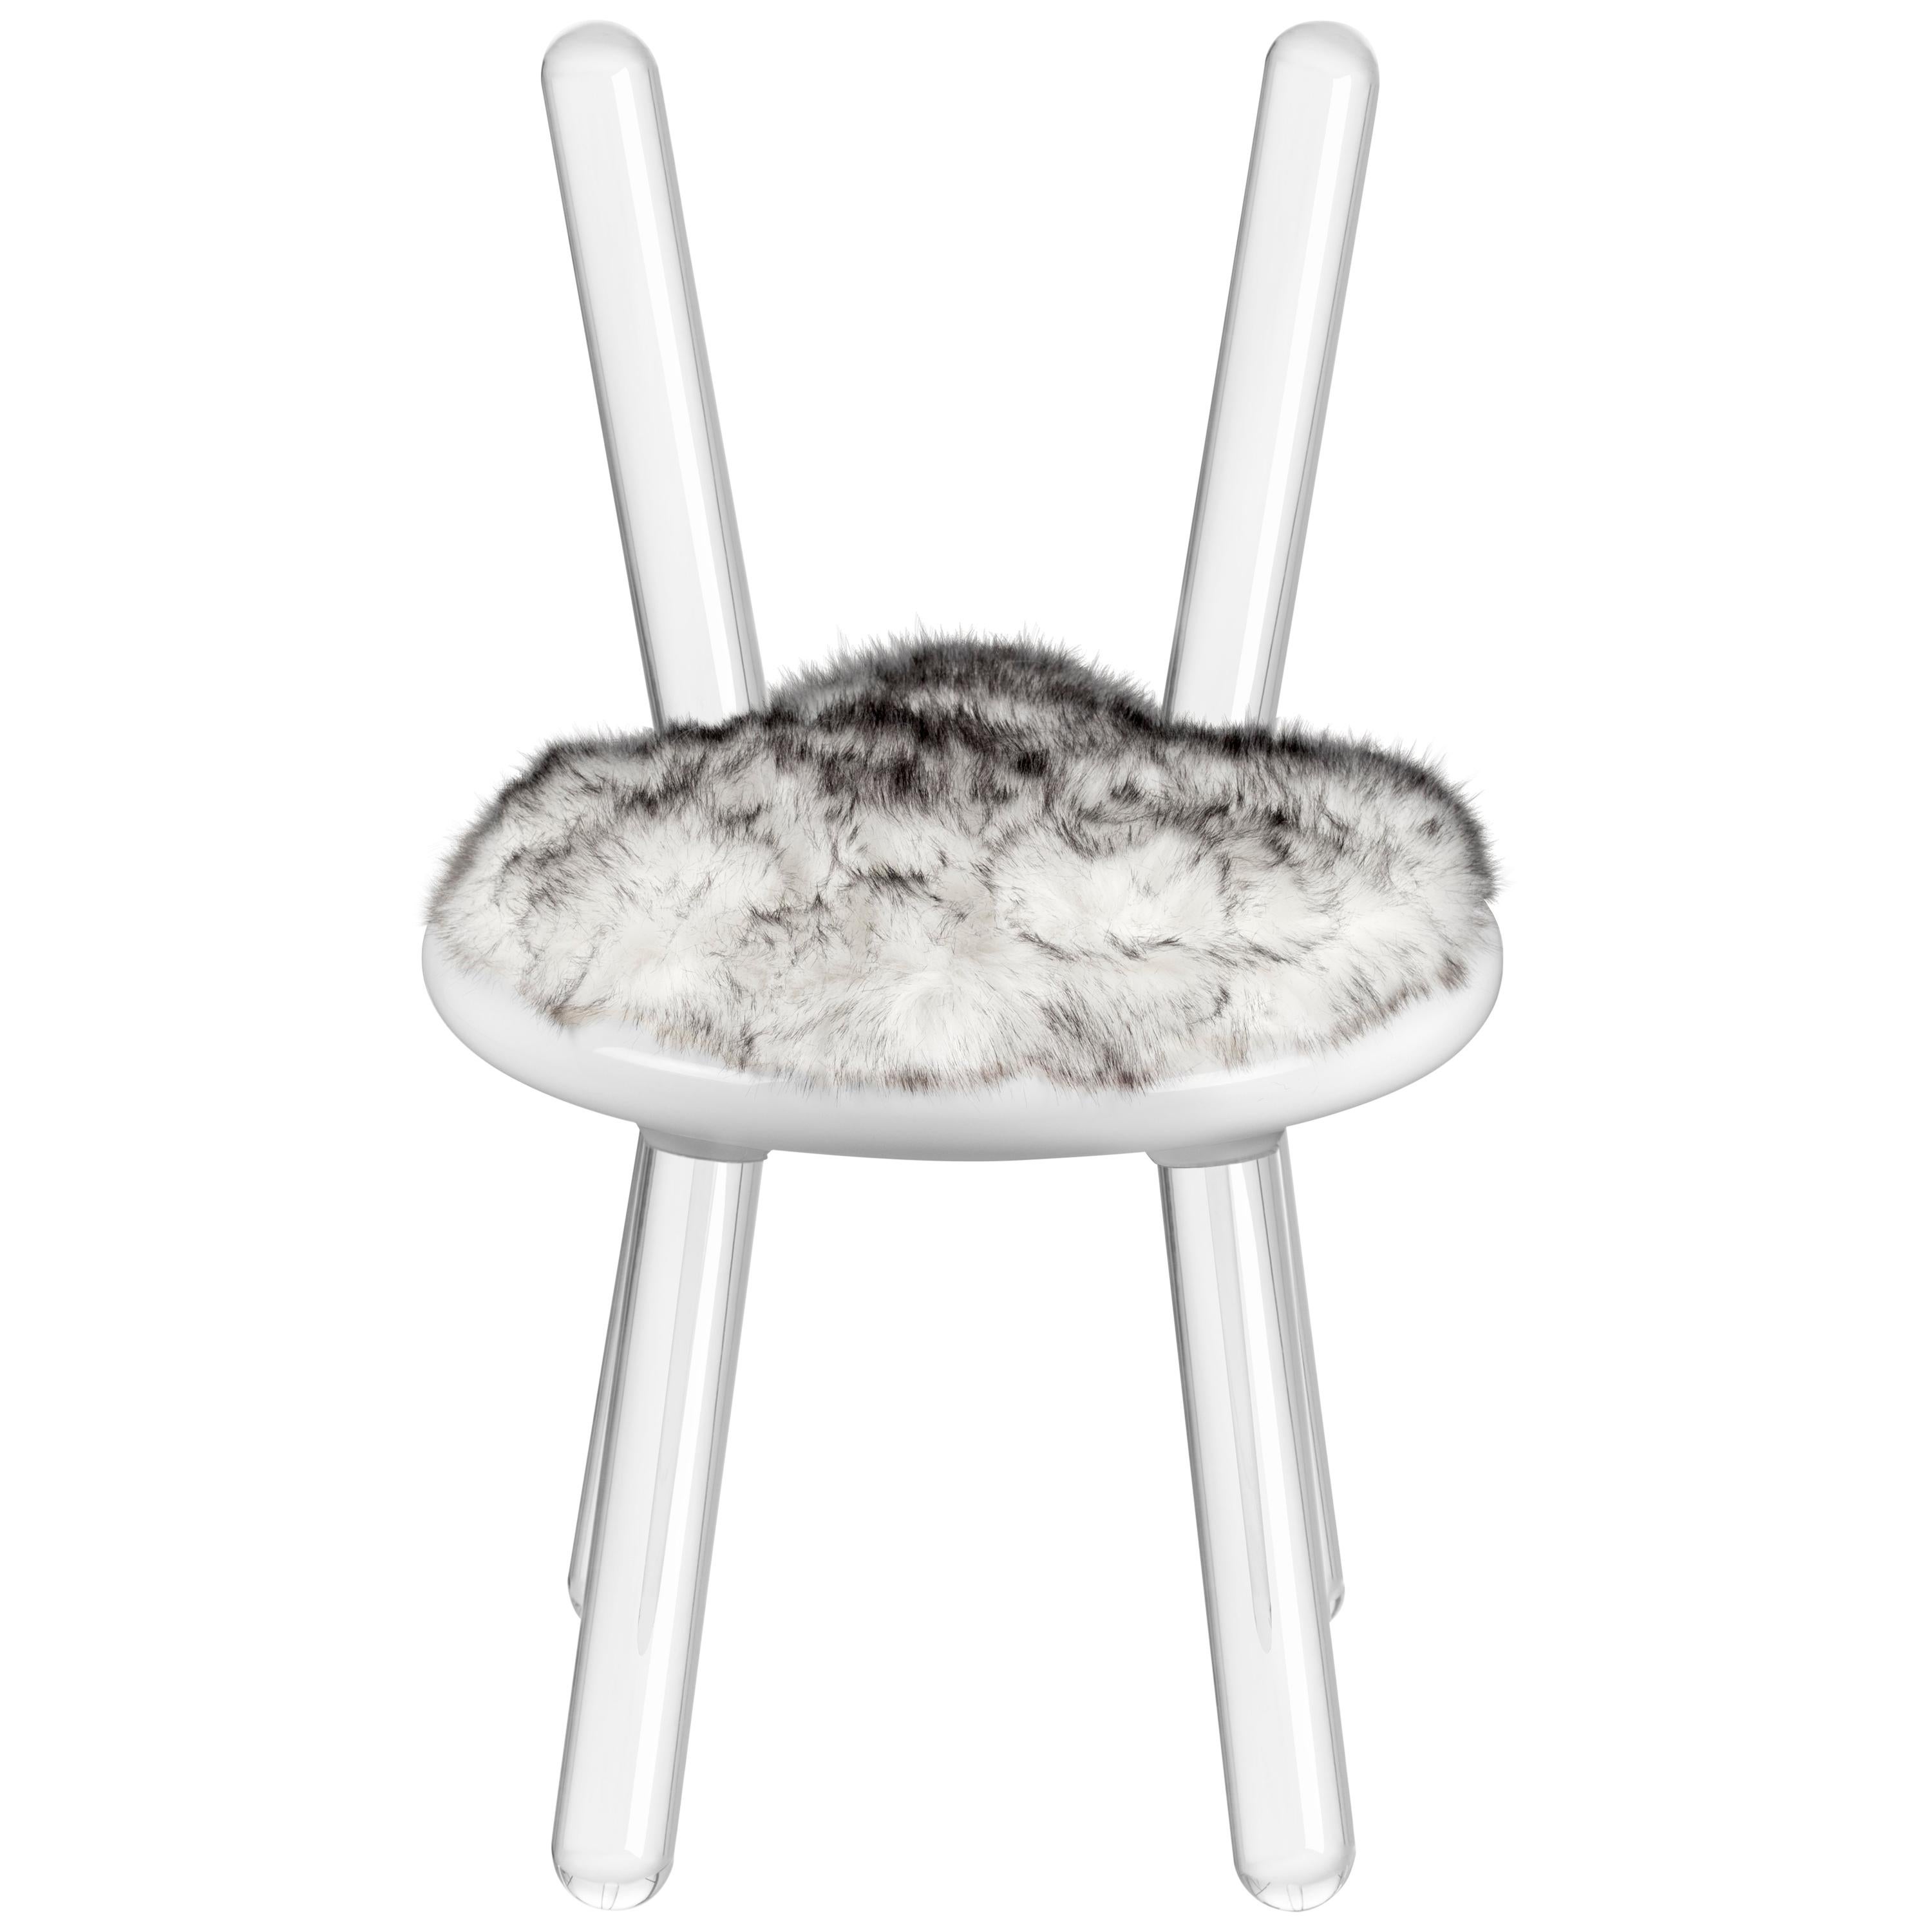 Illusion White Bear Chair in Acrylic with Fur Seat by Circu Magical Furniture